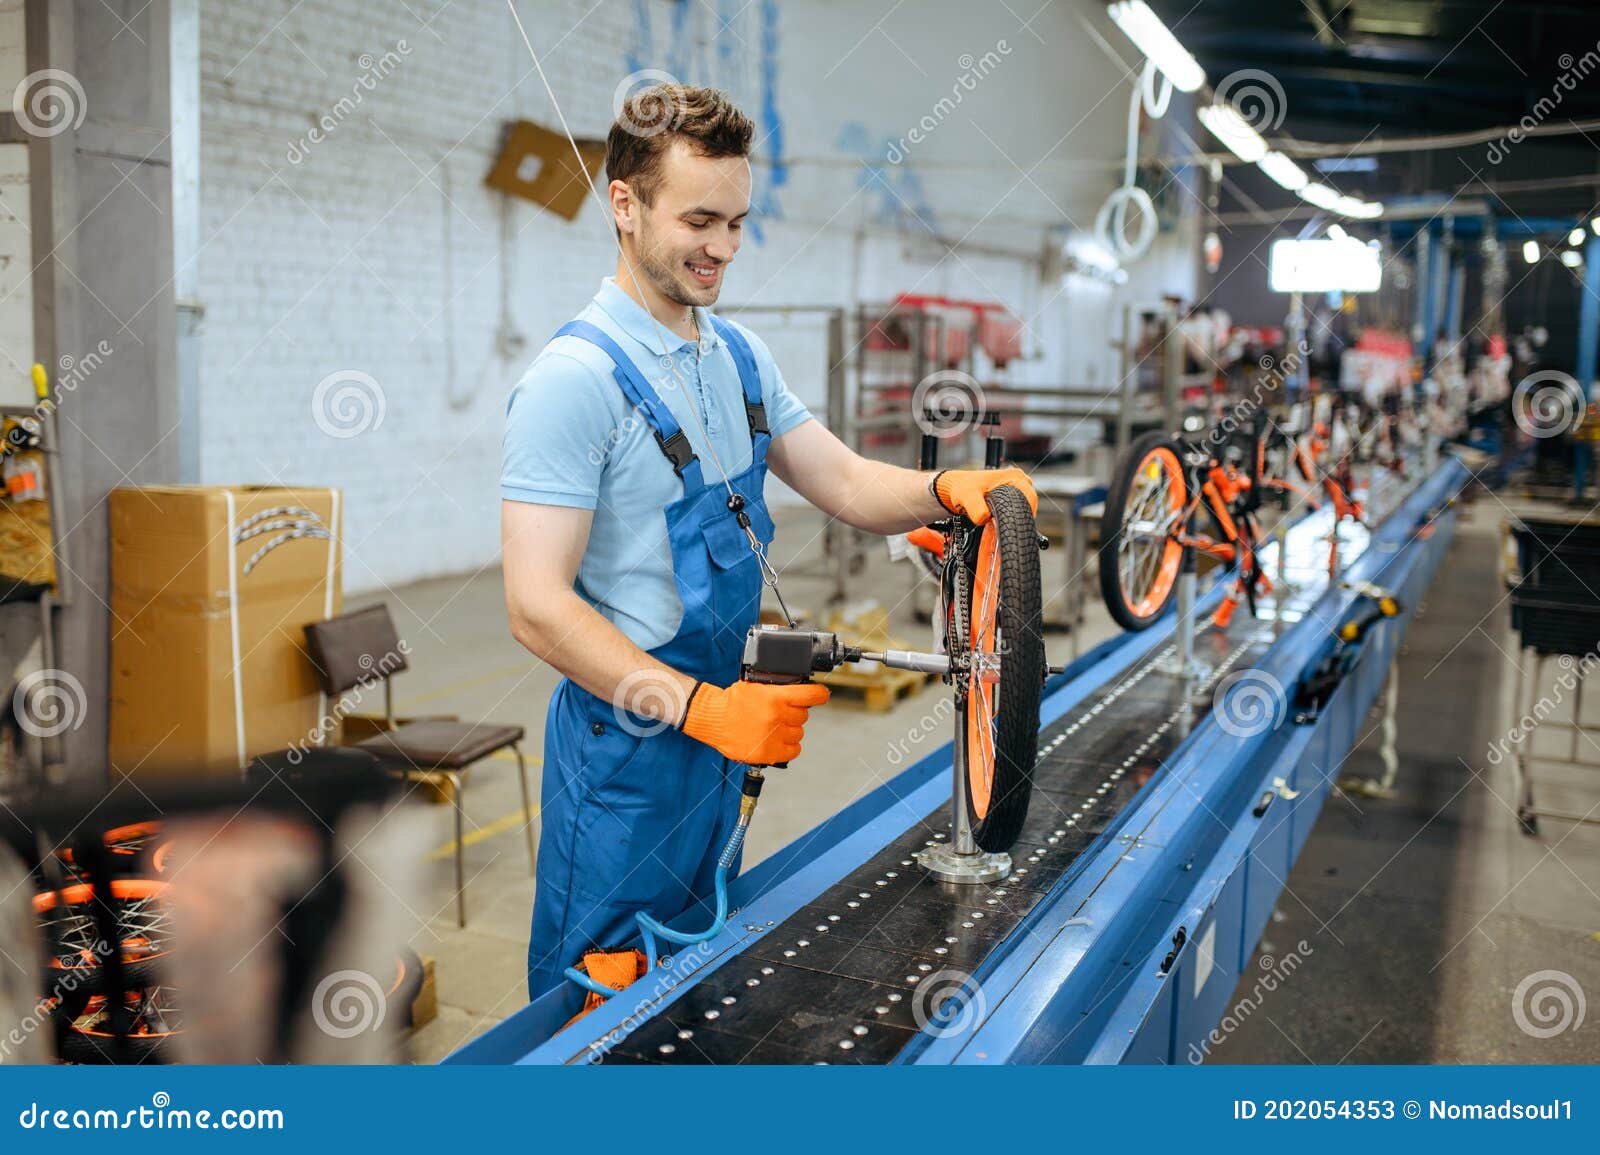 bicycle factory, assembly line, chain installation